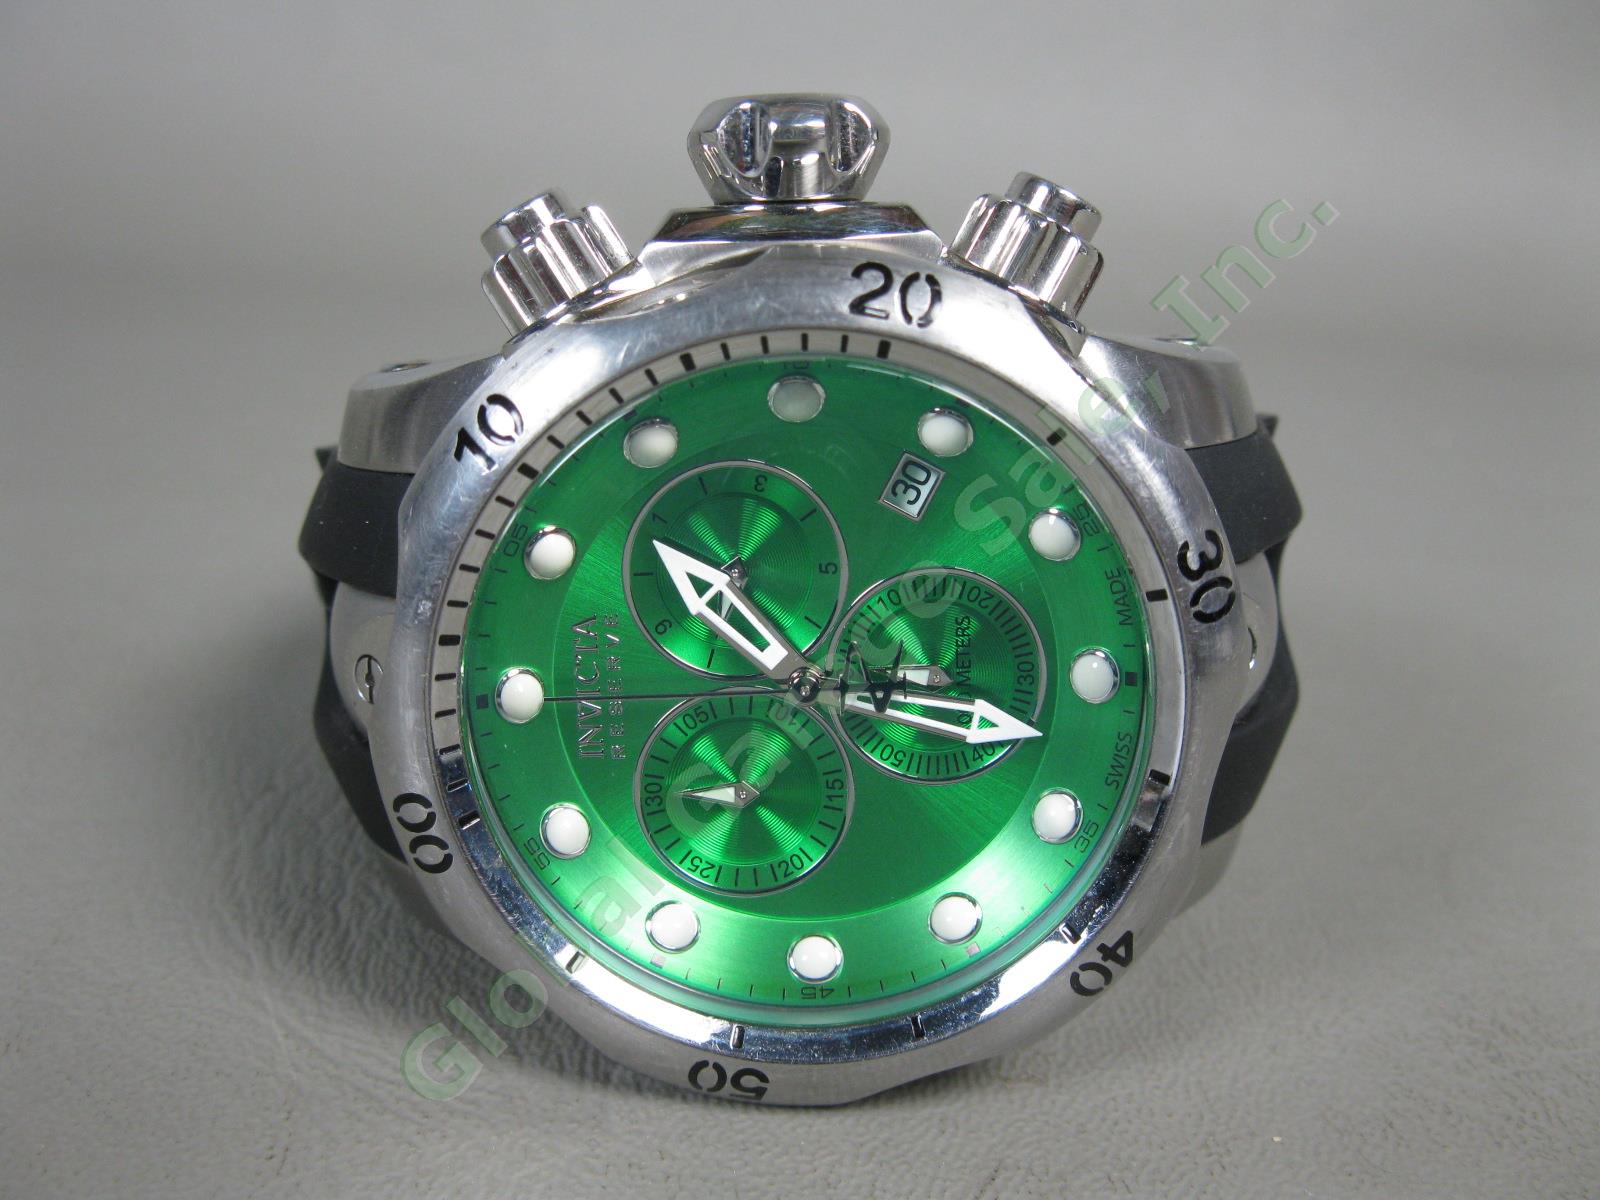 Invicta 6105 Venom Reserve Chronograph Watch Green Dial Works Great! New Battery 3